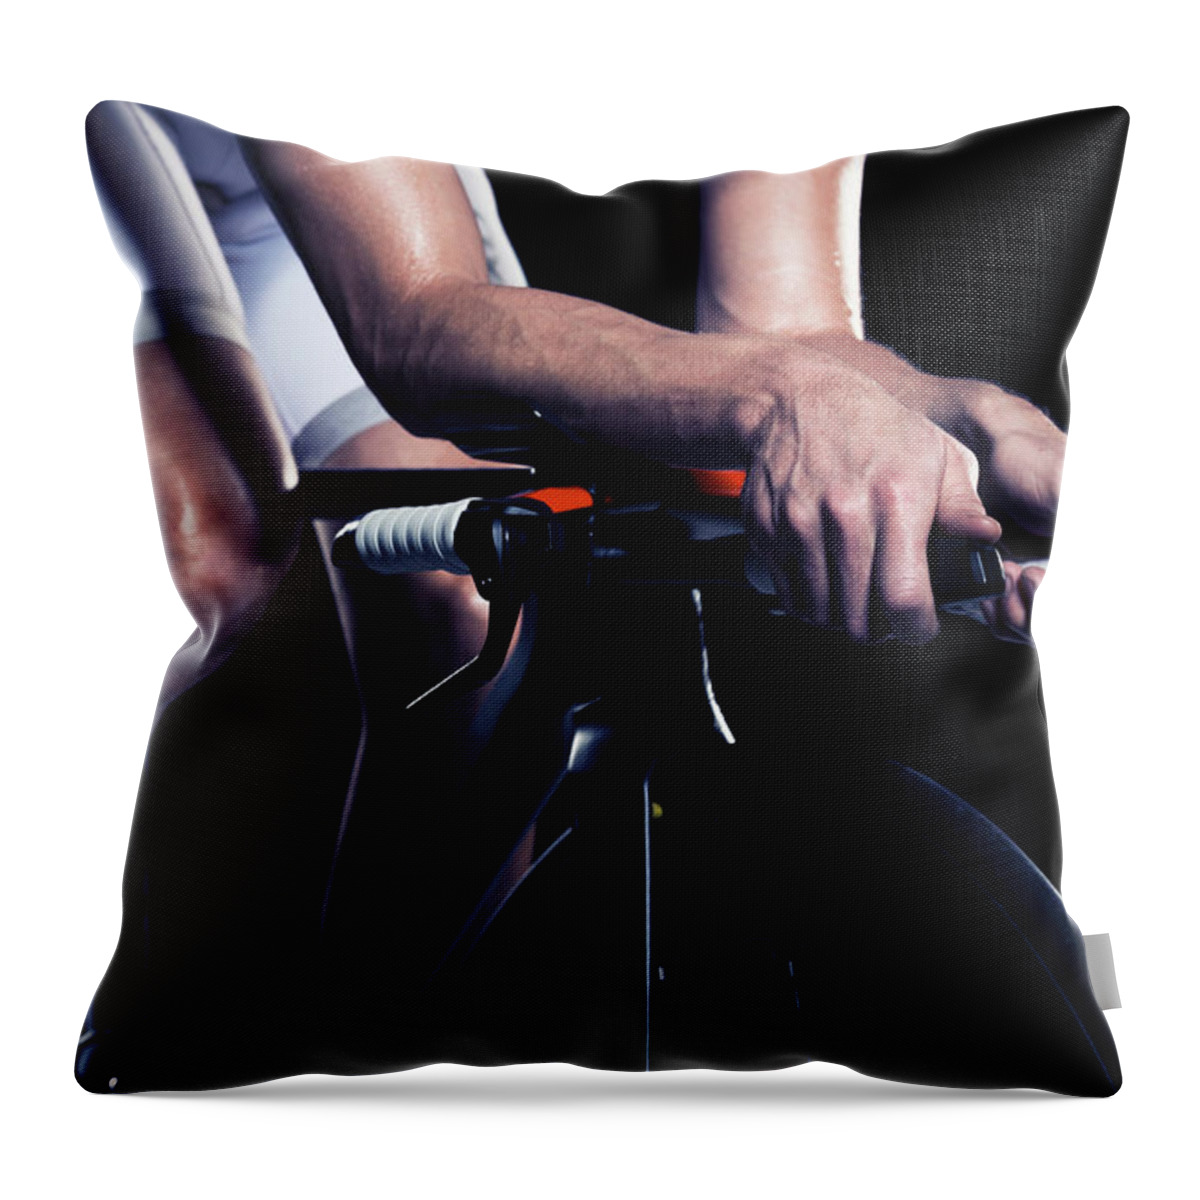 Sports Helmet Throw Pillow featuring the photograph Close-up Of Man Cycling, Studio Shot by Johner Images